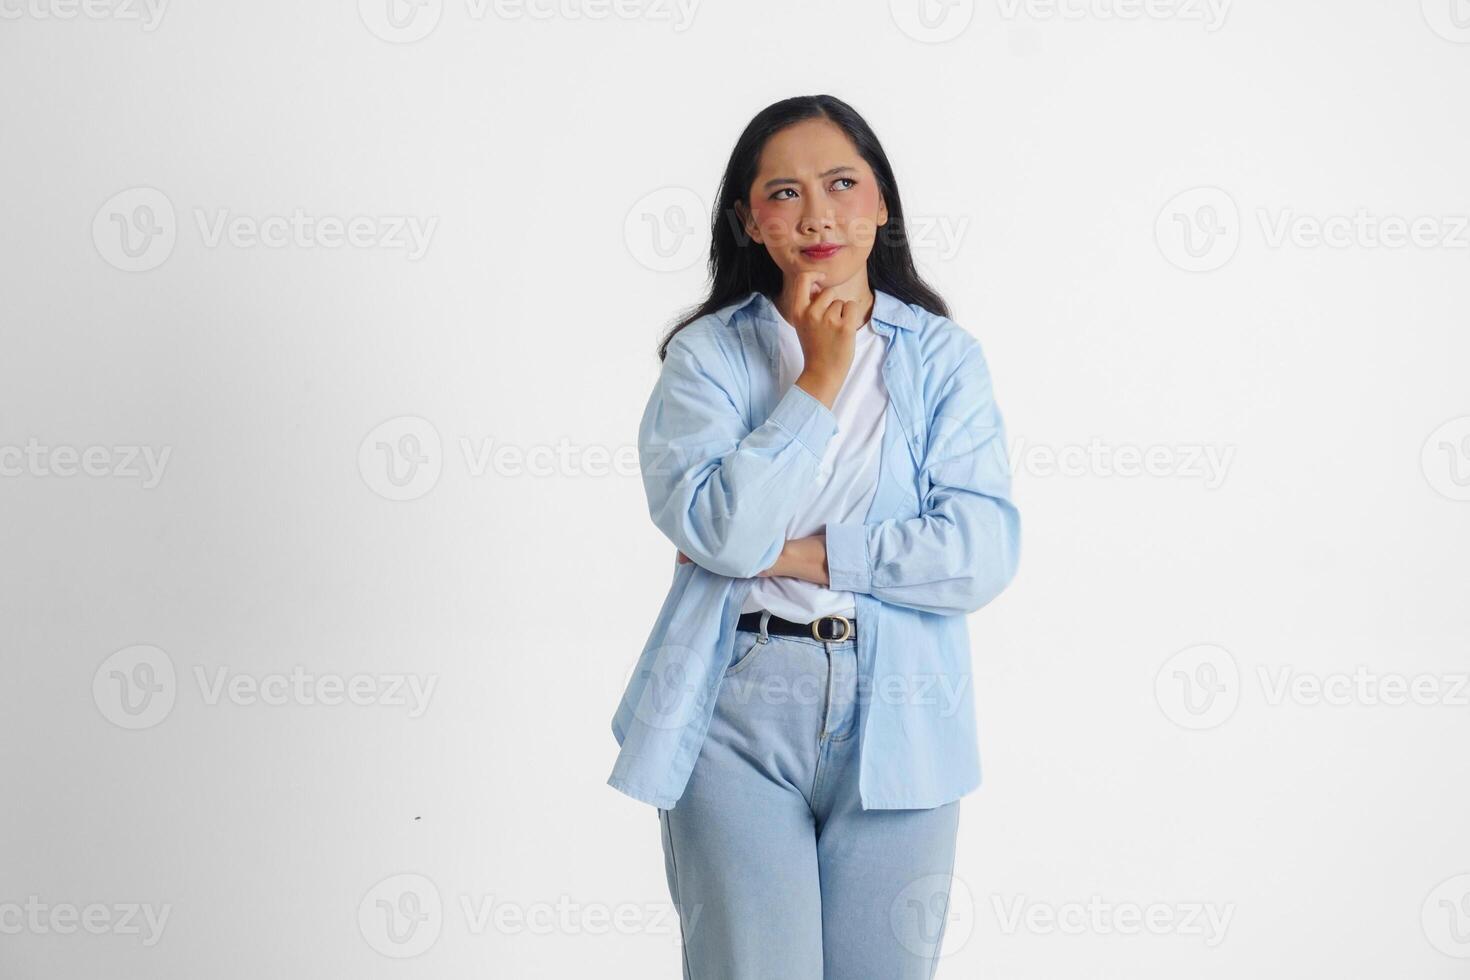 A thoughtful Asian woman wearing blue shirt is imagining her thoughts, isolated by white background. photo